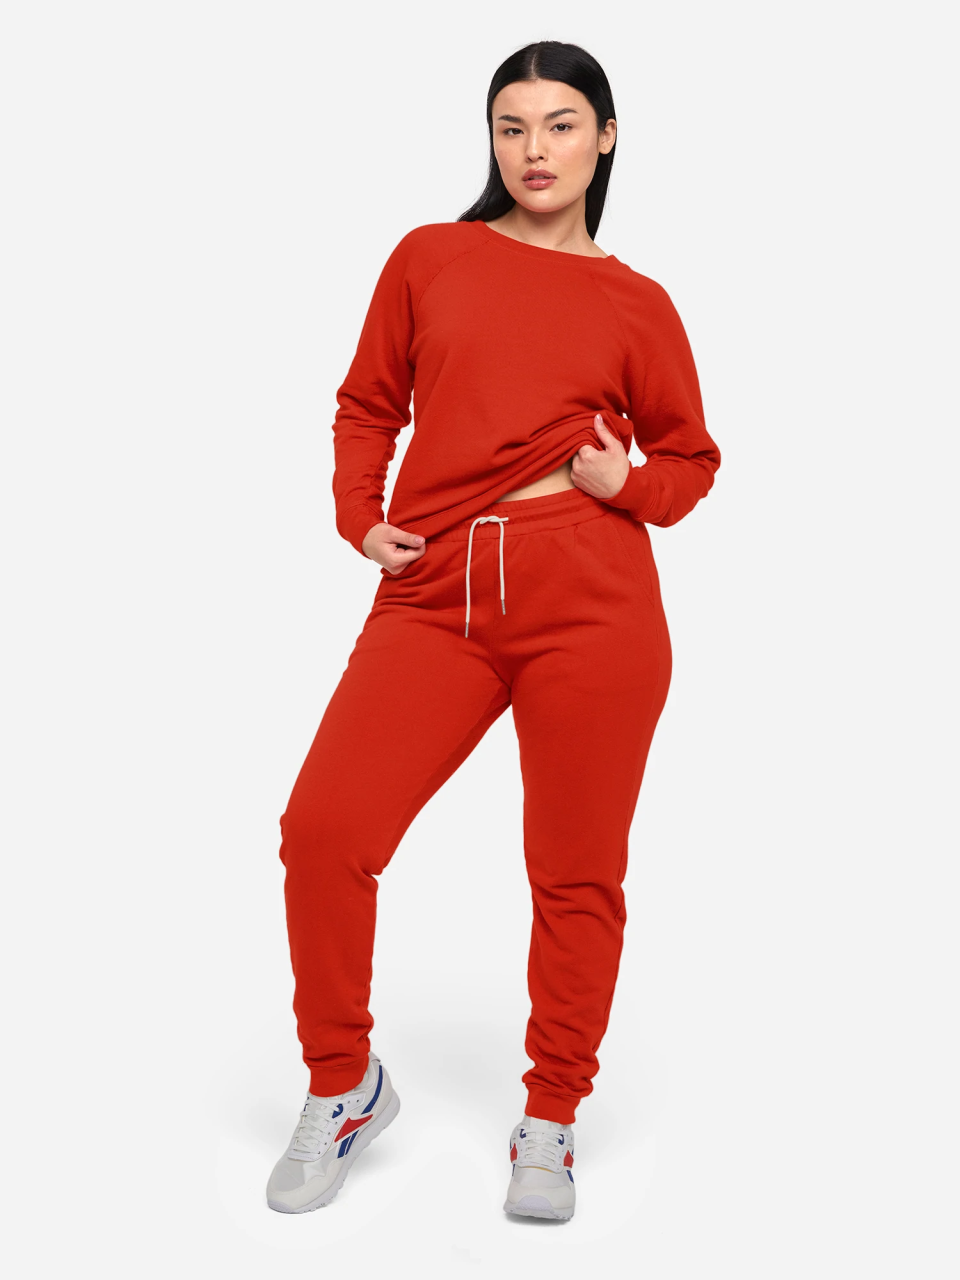 <h3>Mate</h3><br>The mixing and matching opportunities are endless with Mate's Organic Terry sweatsuit which comes in 15 colors and sizes ranging from XS to 3X. <br><br><em>Shop </em><strong><em><a href="https://go.skimresources.com?id=30283X879131&xs=1&url=https%3A%2F%2Fmatethelabel.com%2F" rel="nofollow noopener" target="_blank" data-ylk="slk:Mate" class="link ">Mate</a></em></strong><br><br><strong>Mate</strong> Organic Terry Classic Jogger, $, available at <a href="https://go.skimresources.com/?id=30283X879131&url=https%3A%2F%2Fmatethelabel.com%2Fproducts%2Forganic-terry-classic-jogger-cherry" rel="nofollow noopener" target="_blank" data-ylk="slk:Mate" class="link ">Mate</a><br><br><strong>Mate</strong> Organic Terry Raglan Sweatshirt, $, available at <a href="https://go.skimresources.com/?id=30283X879131&url=https%3A%2F%2Fmatethelabel.com%2Fproducts%2Forganic-terry-raglan-sweatshirt-cherry" rel="nofollow noopener" target="_blank" data-ylk="slk:Mate" class="link ">Mate</a>